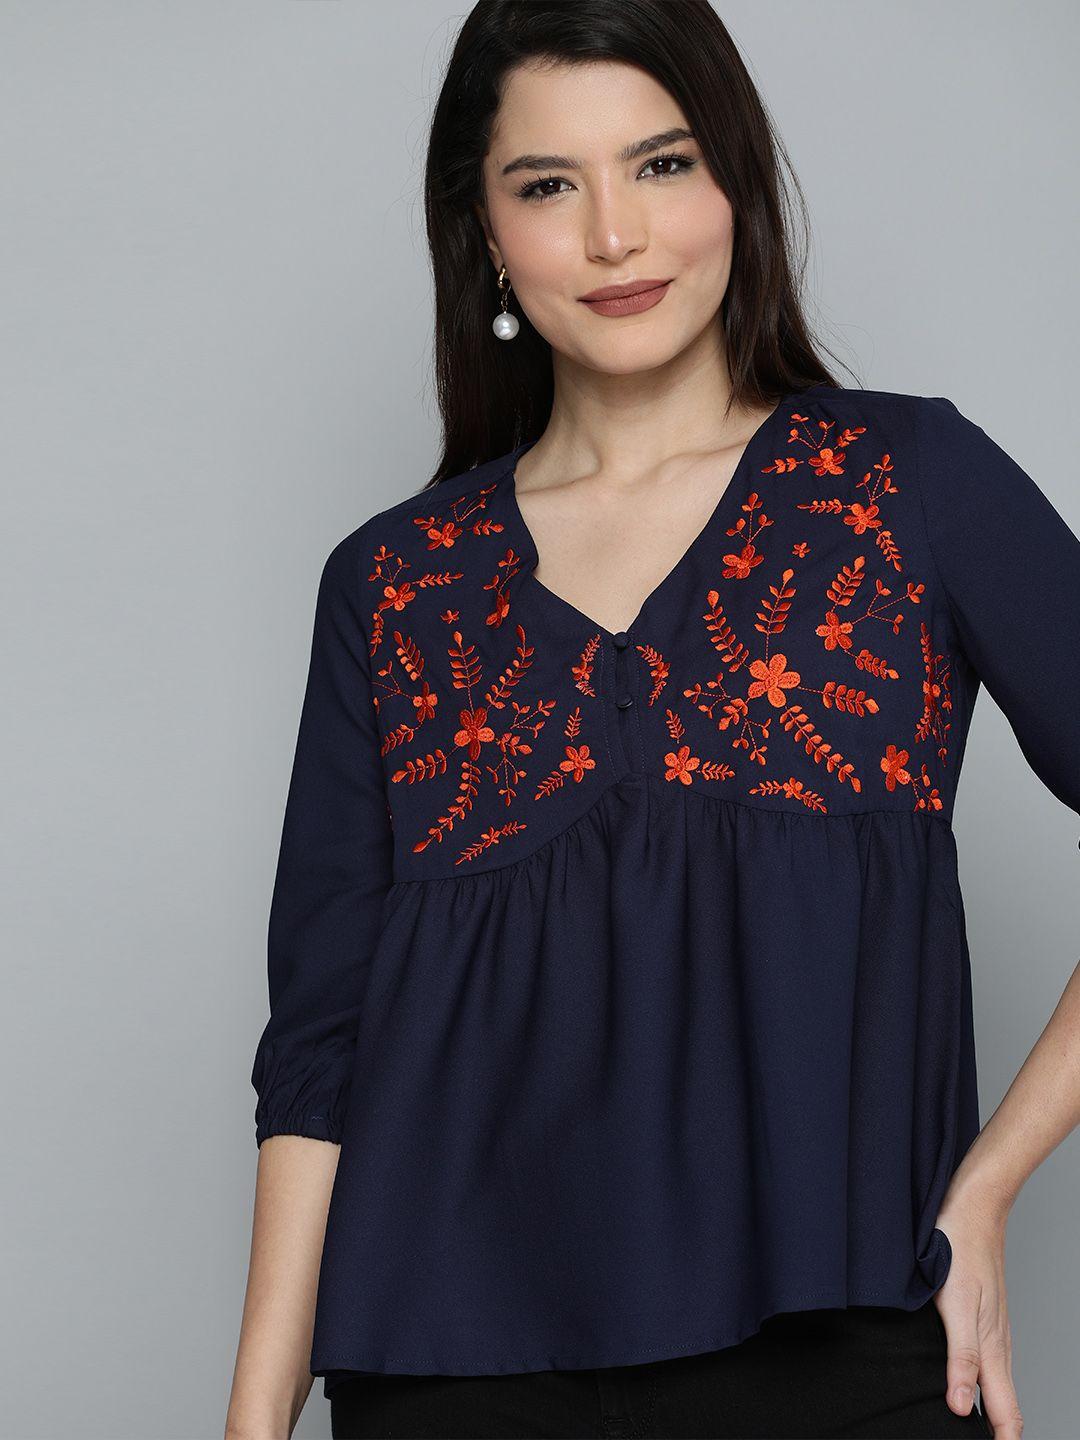 chemistry-navy-blue-&-red-floral-embroidered-v---neck-empire-top